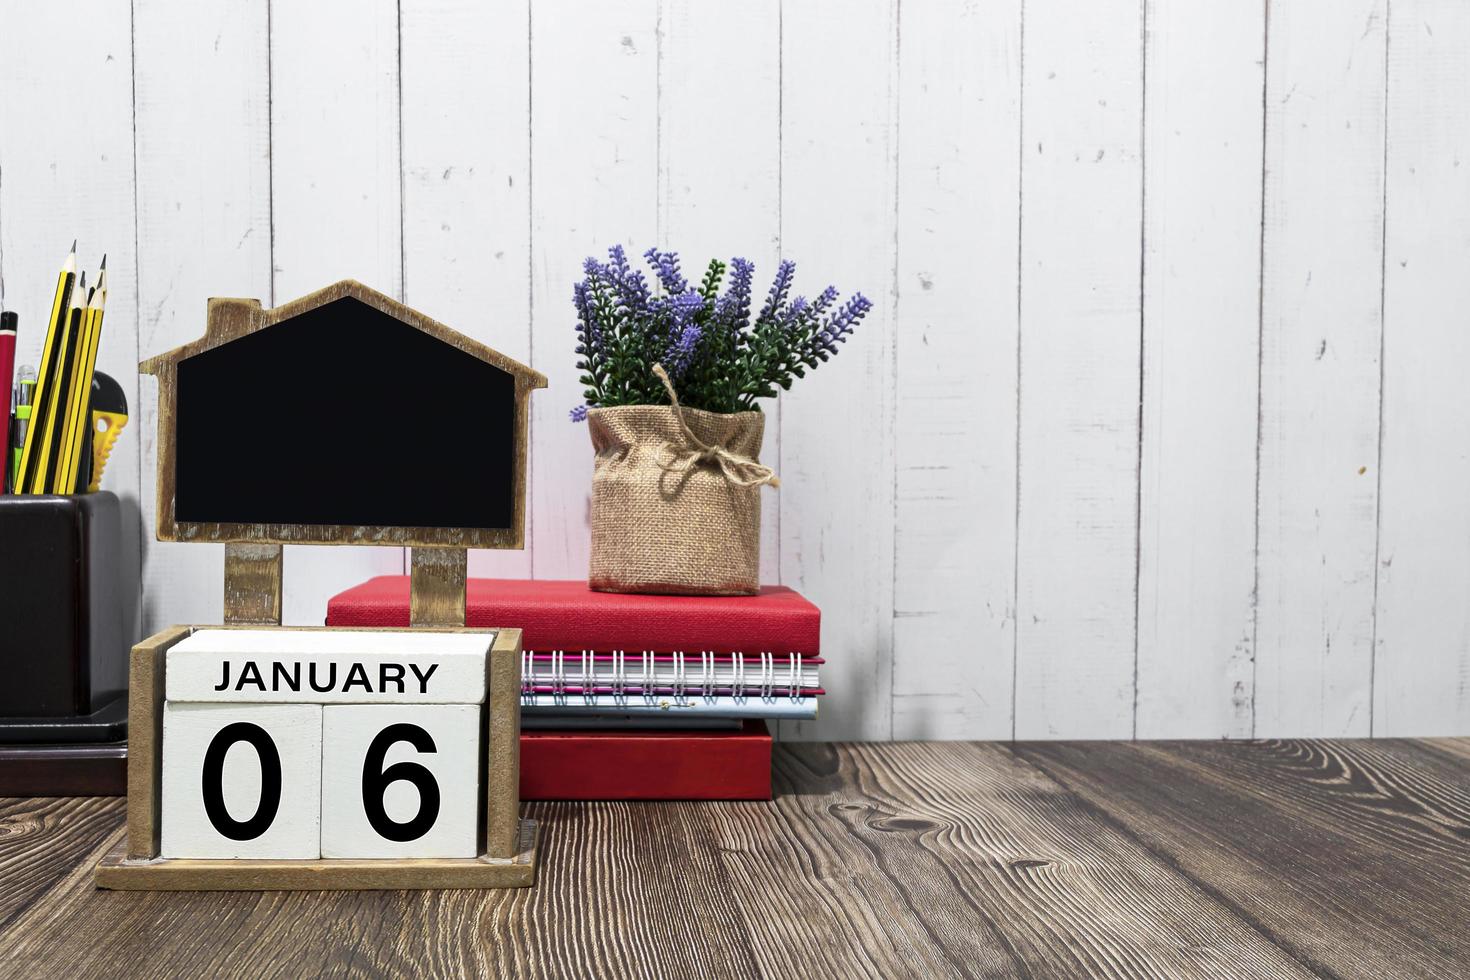 January 06 calendar date text on white wooden block with stationeries on wooden desk photo